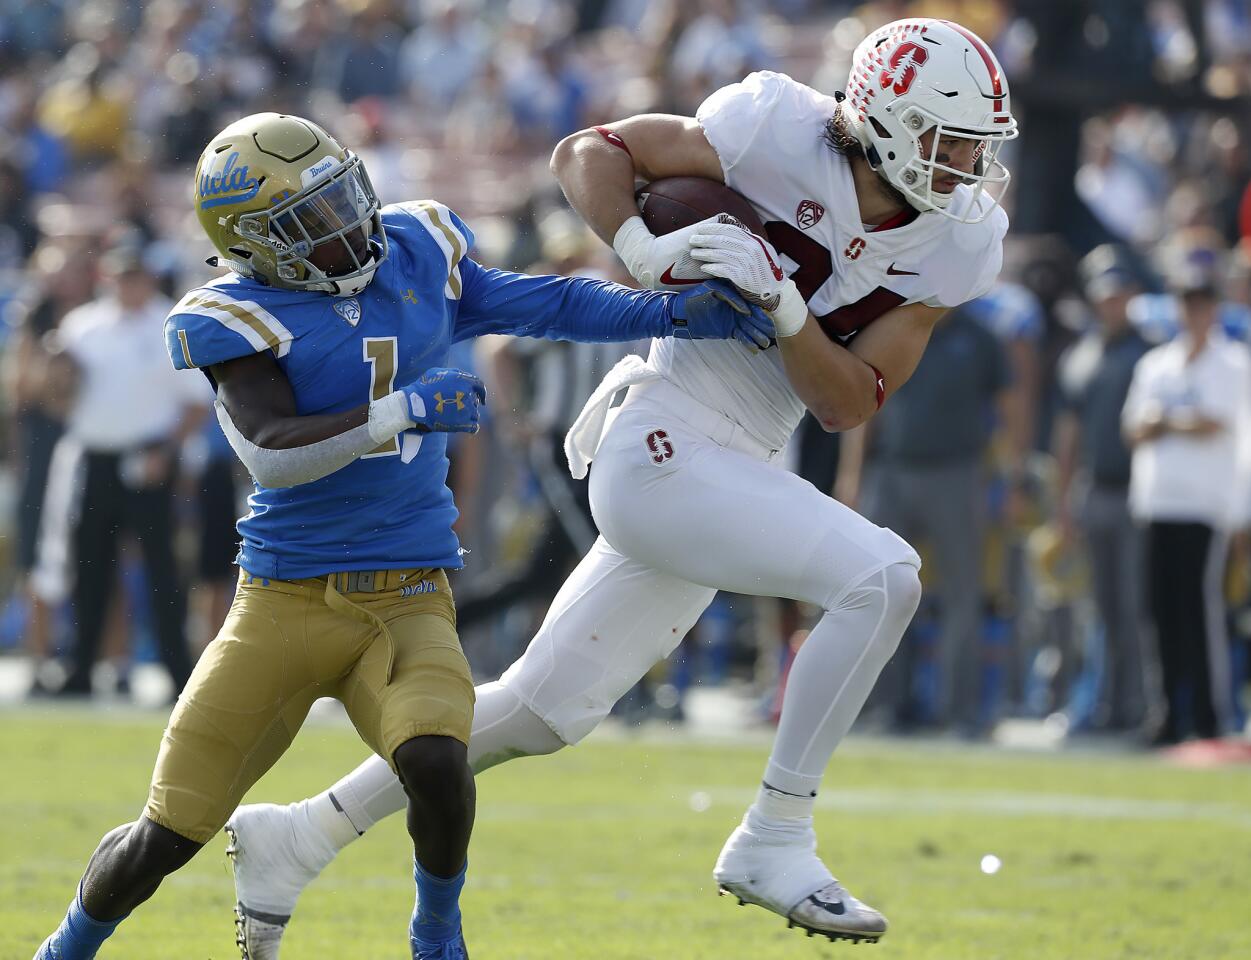 Stanford tight end Colby Parkinson brings a pass reception to the UCLA two-yard line against Bruins cortnerback Darnay Holmes in the second quarter.